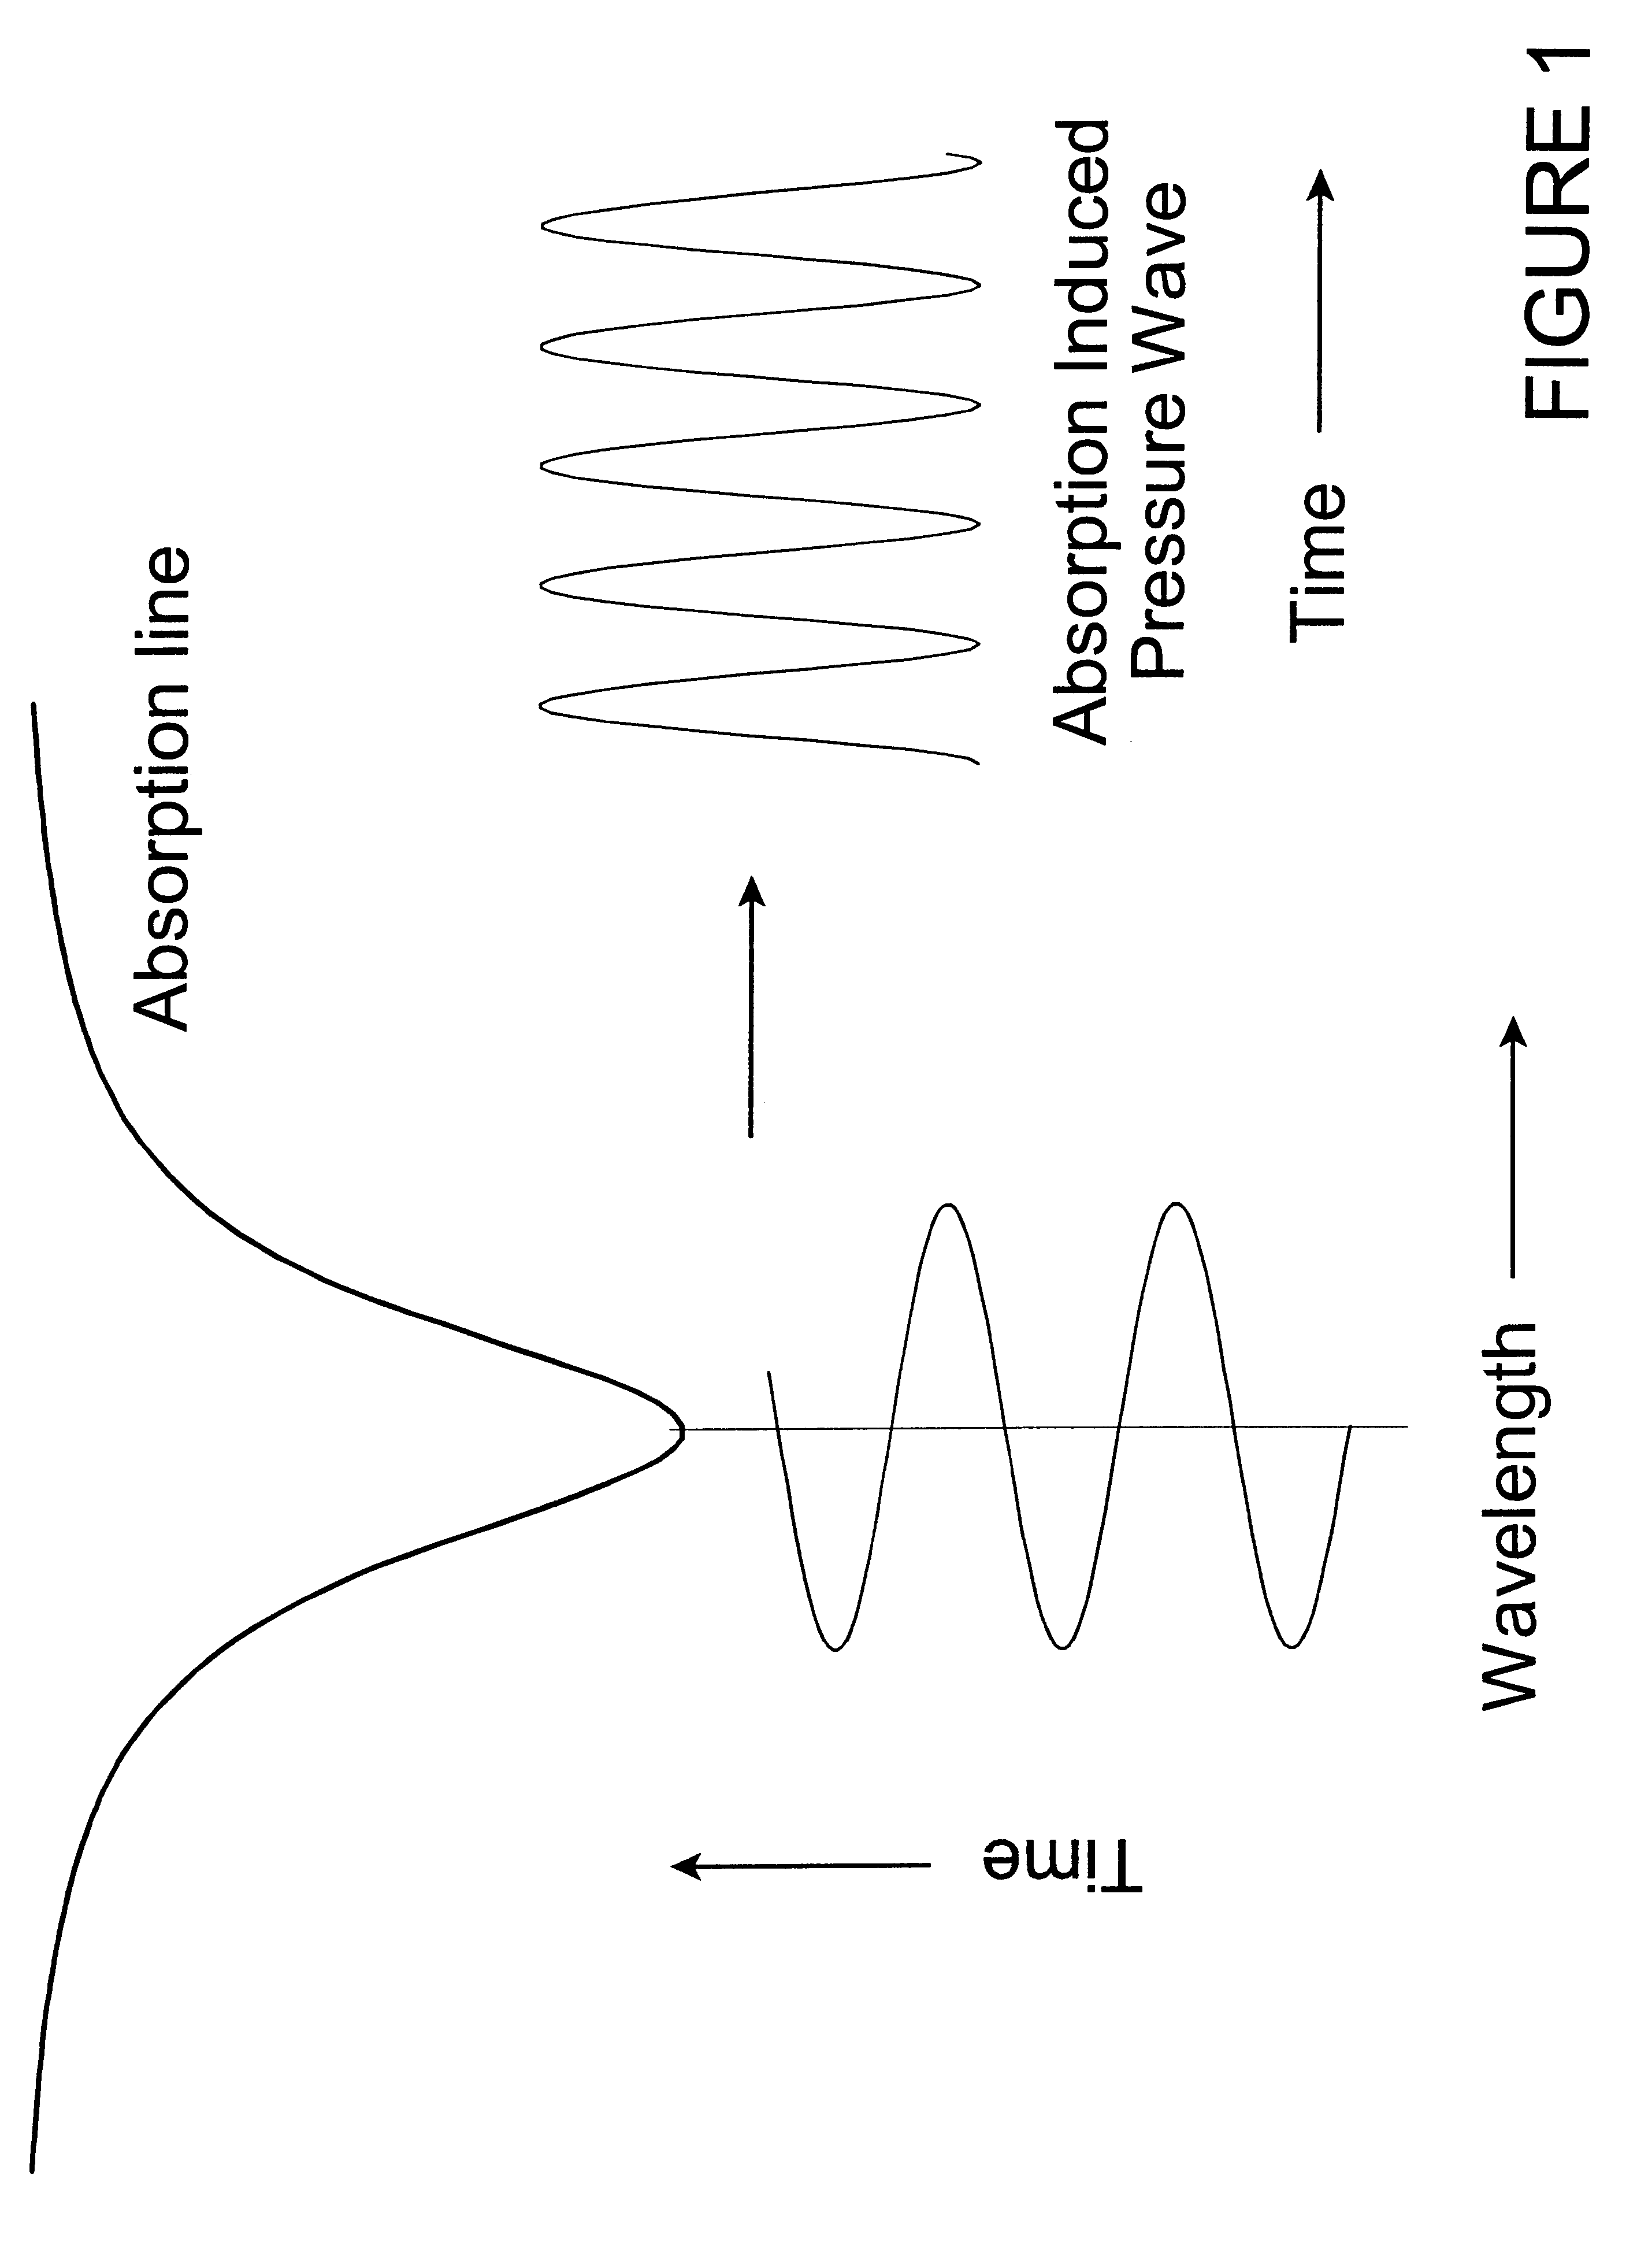 Wavelength modulated photoacoustic spectrometer